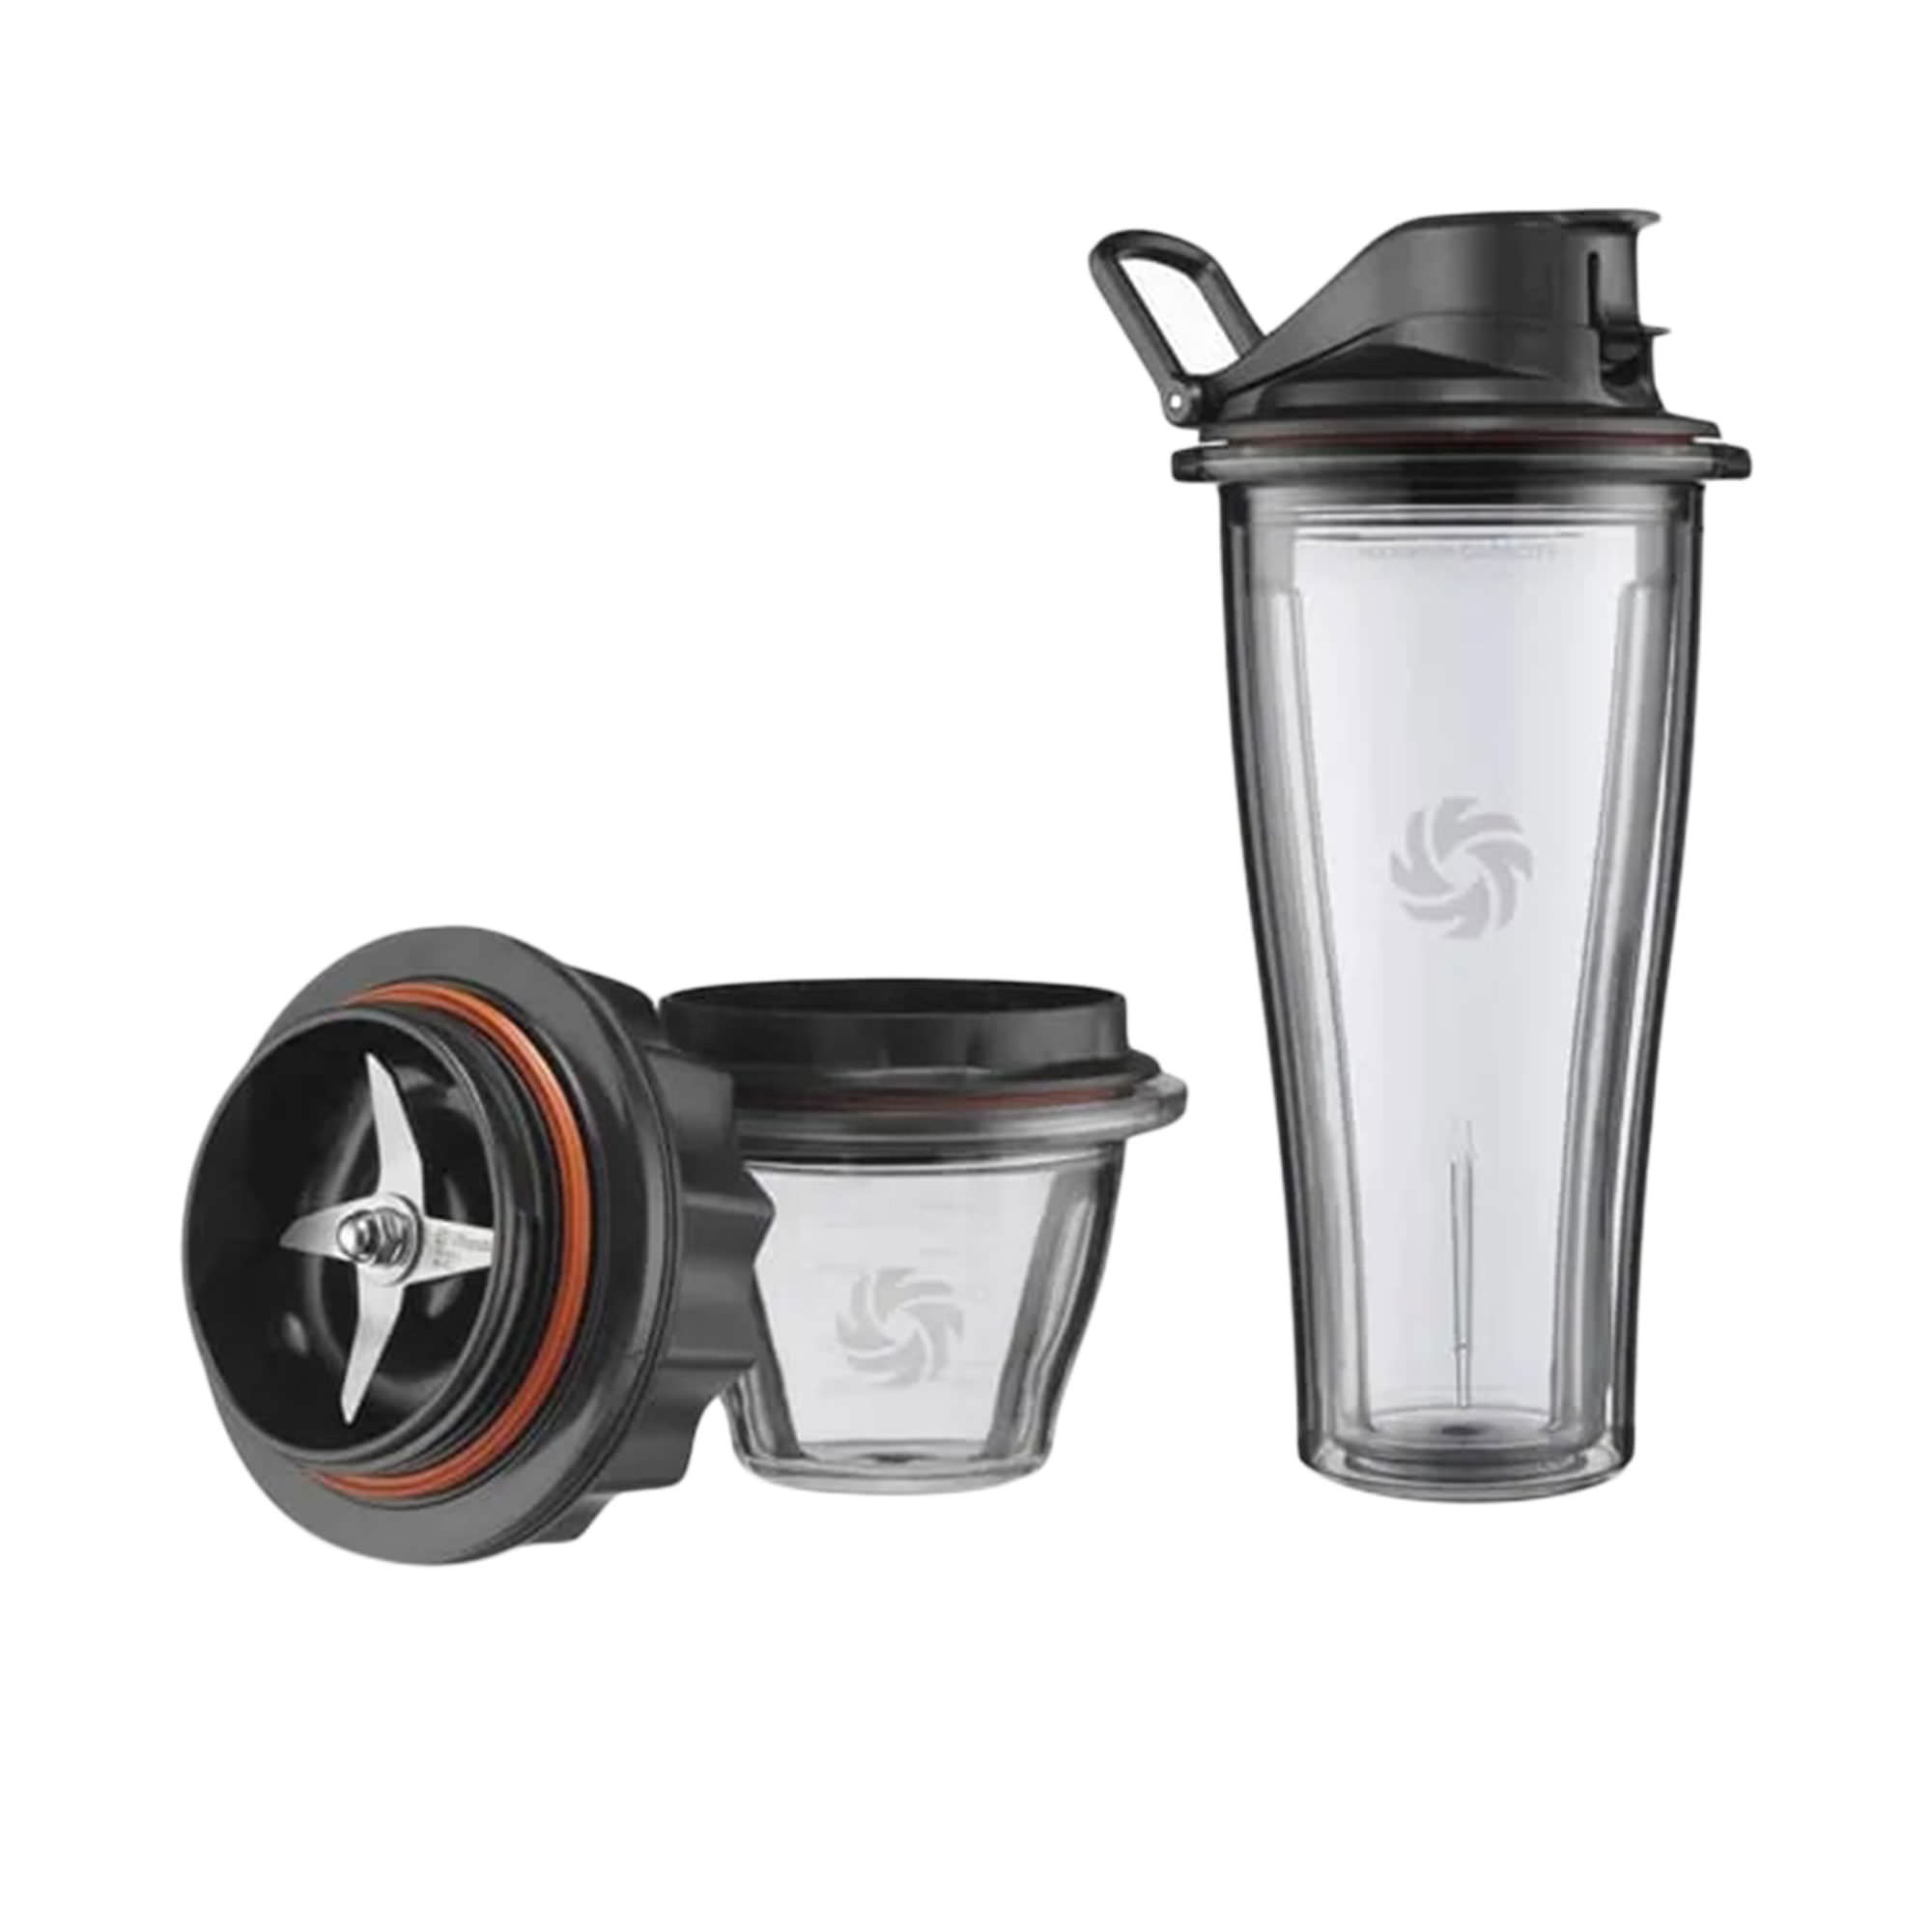 Vitamix Ascent Series Cup and Bowl Starter Kit Image 1